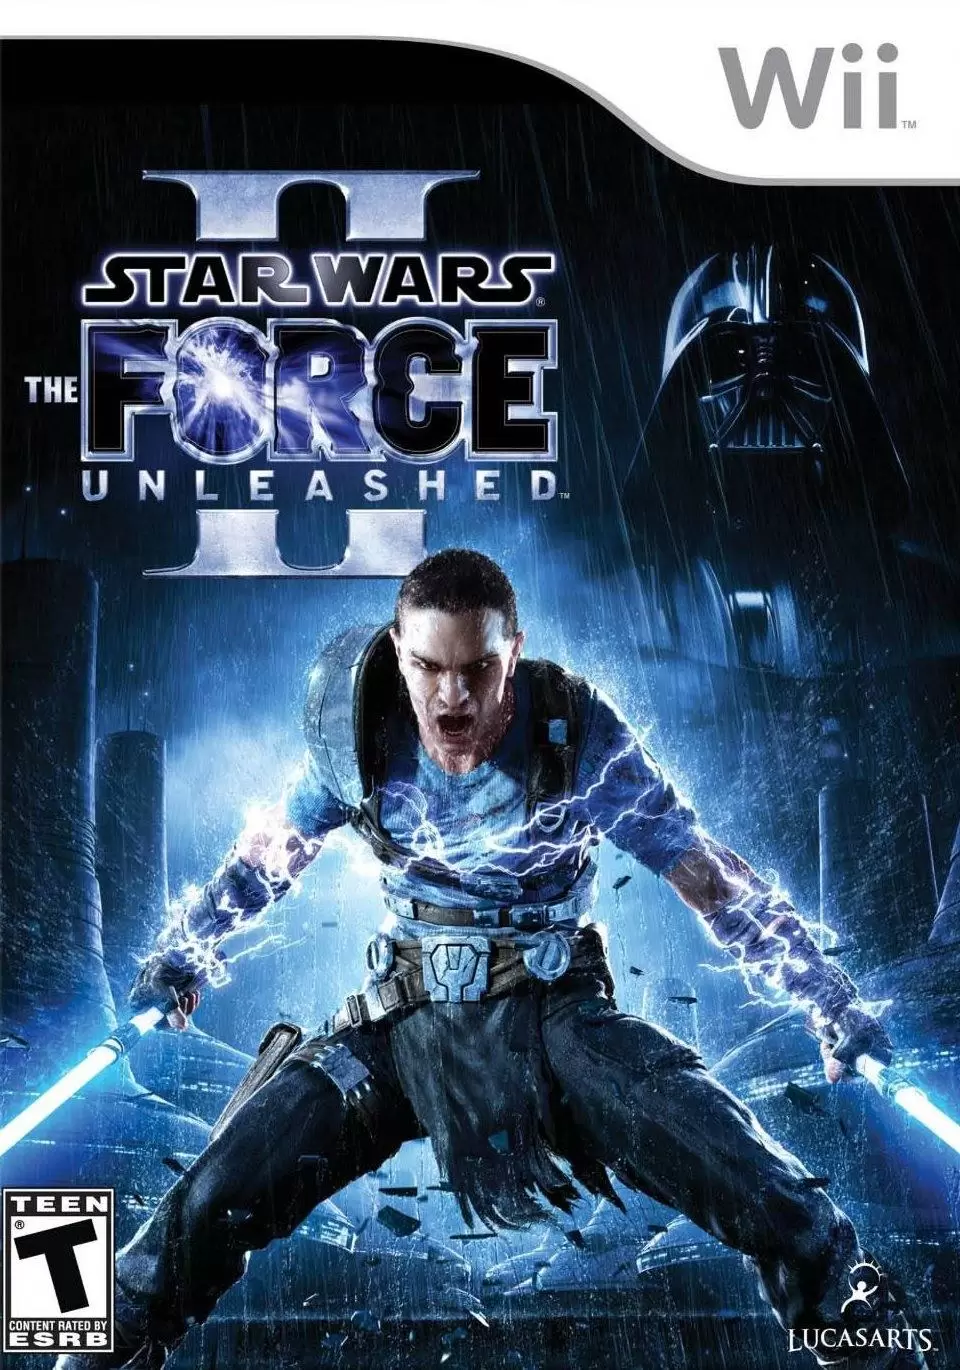 Nintendo Wii Games - Star Wars: The Force Unleashed II